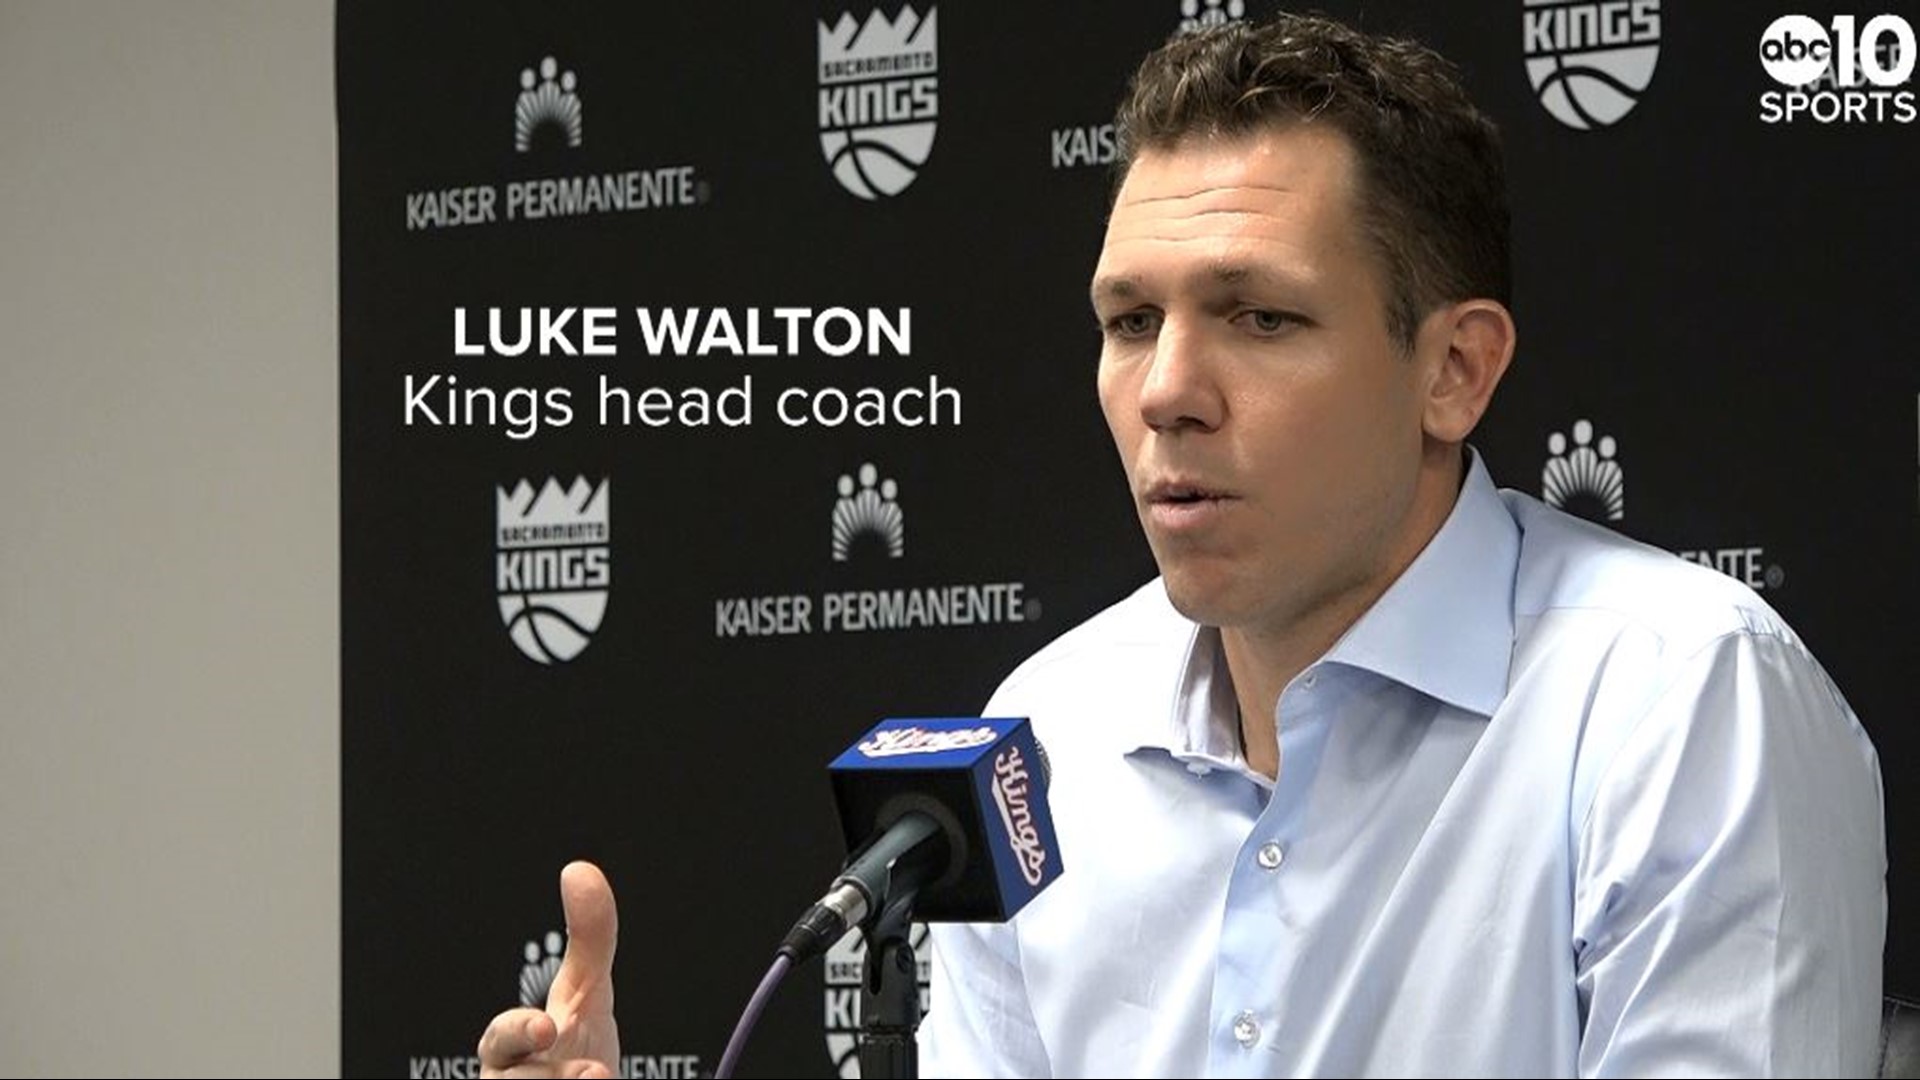 Prior to Tuesday’s game against the Trail Blazers in Sacramento, Kings coach Luke Walton talks about the impact the injury loss of De'Aaron Fox will have on his team